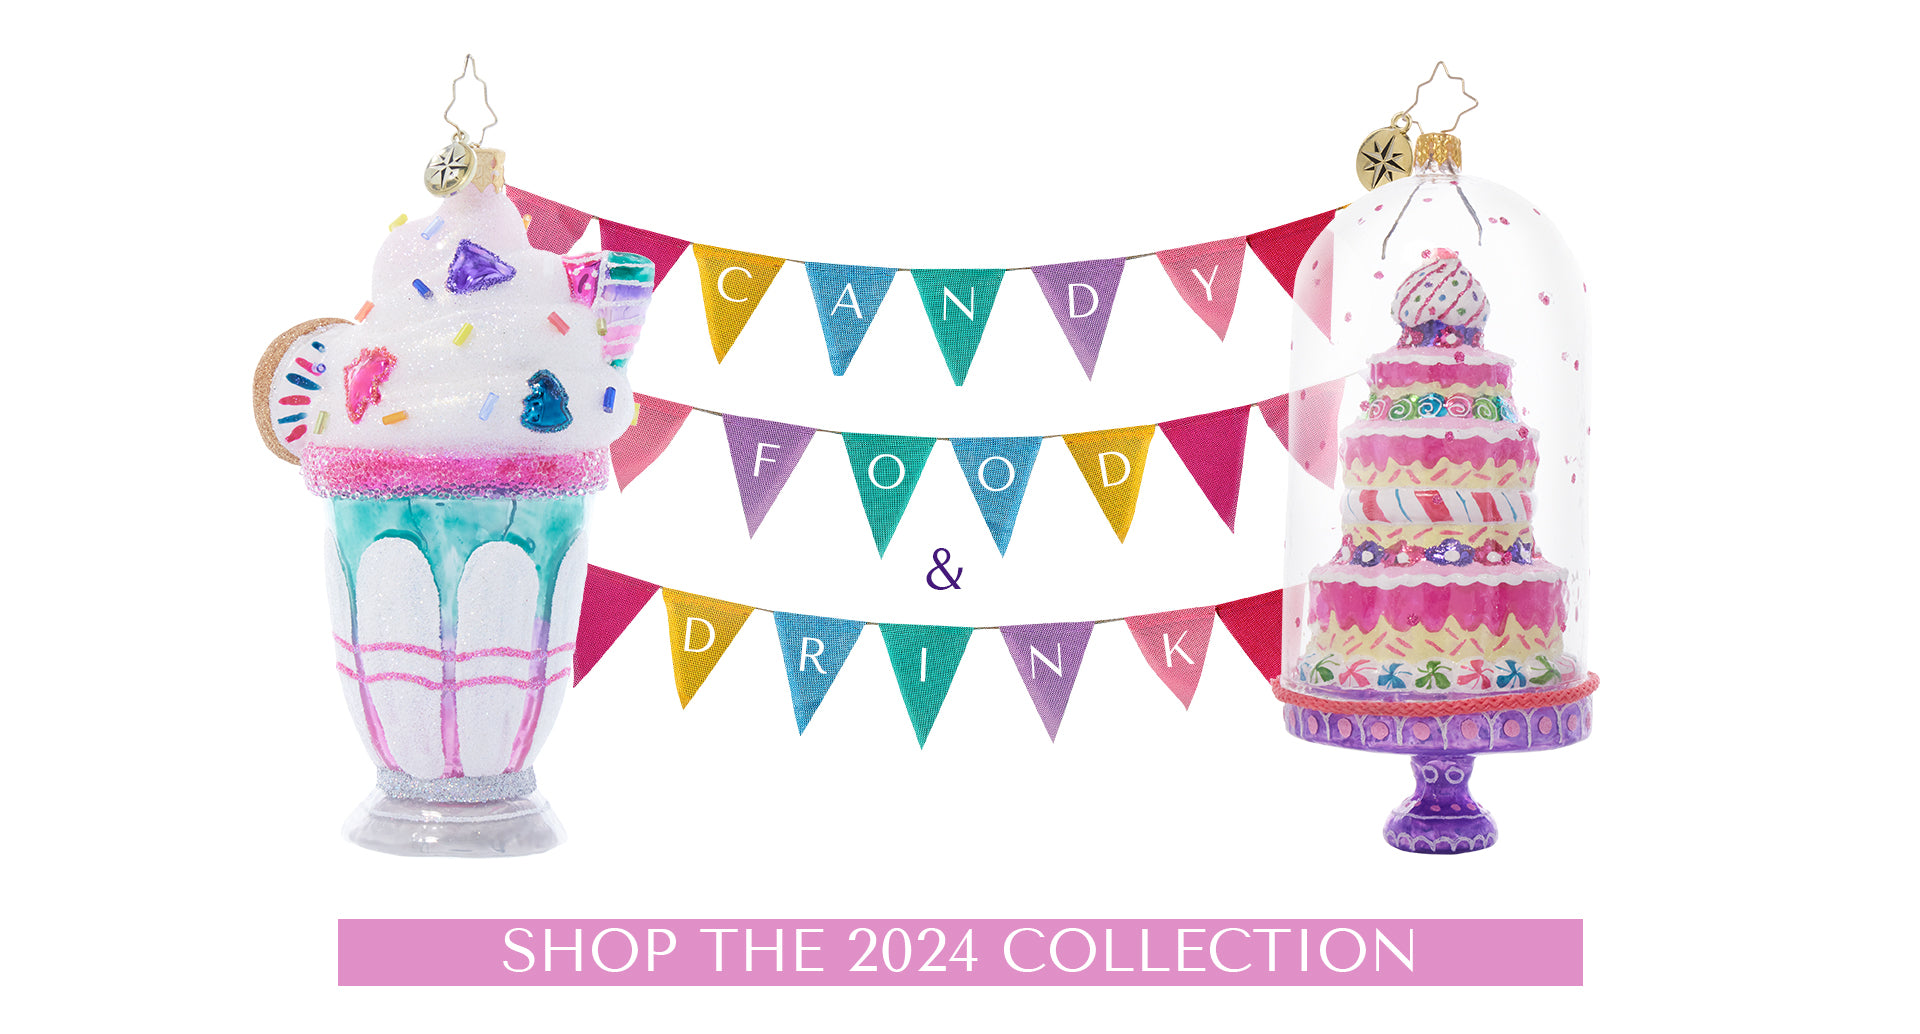 Shop the 2024 Candy, Food & Drink Ornament Collection